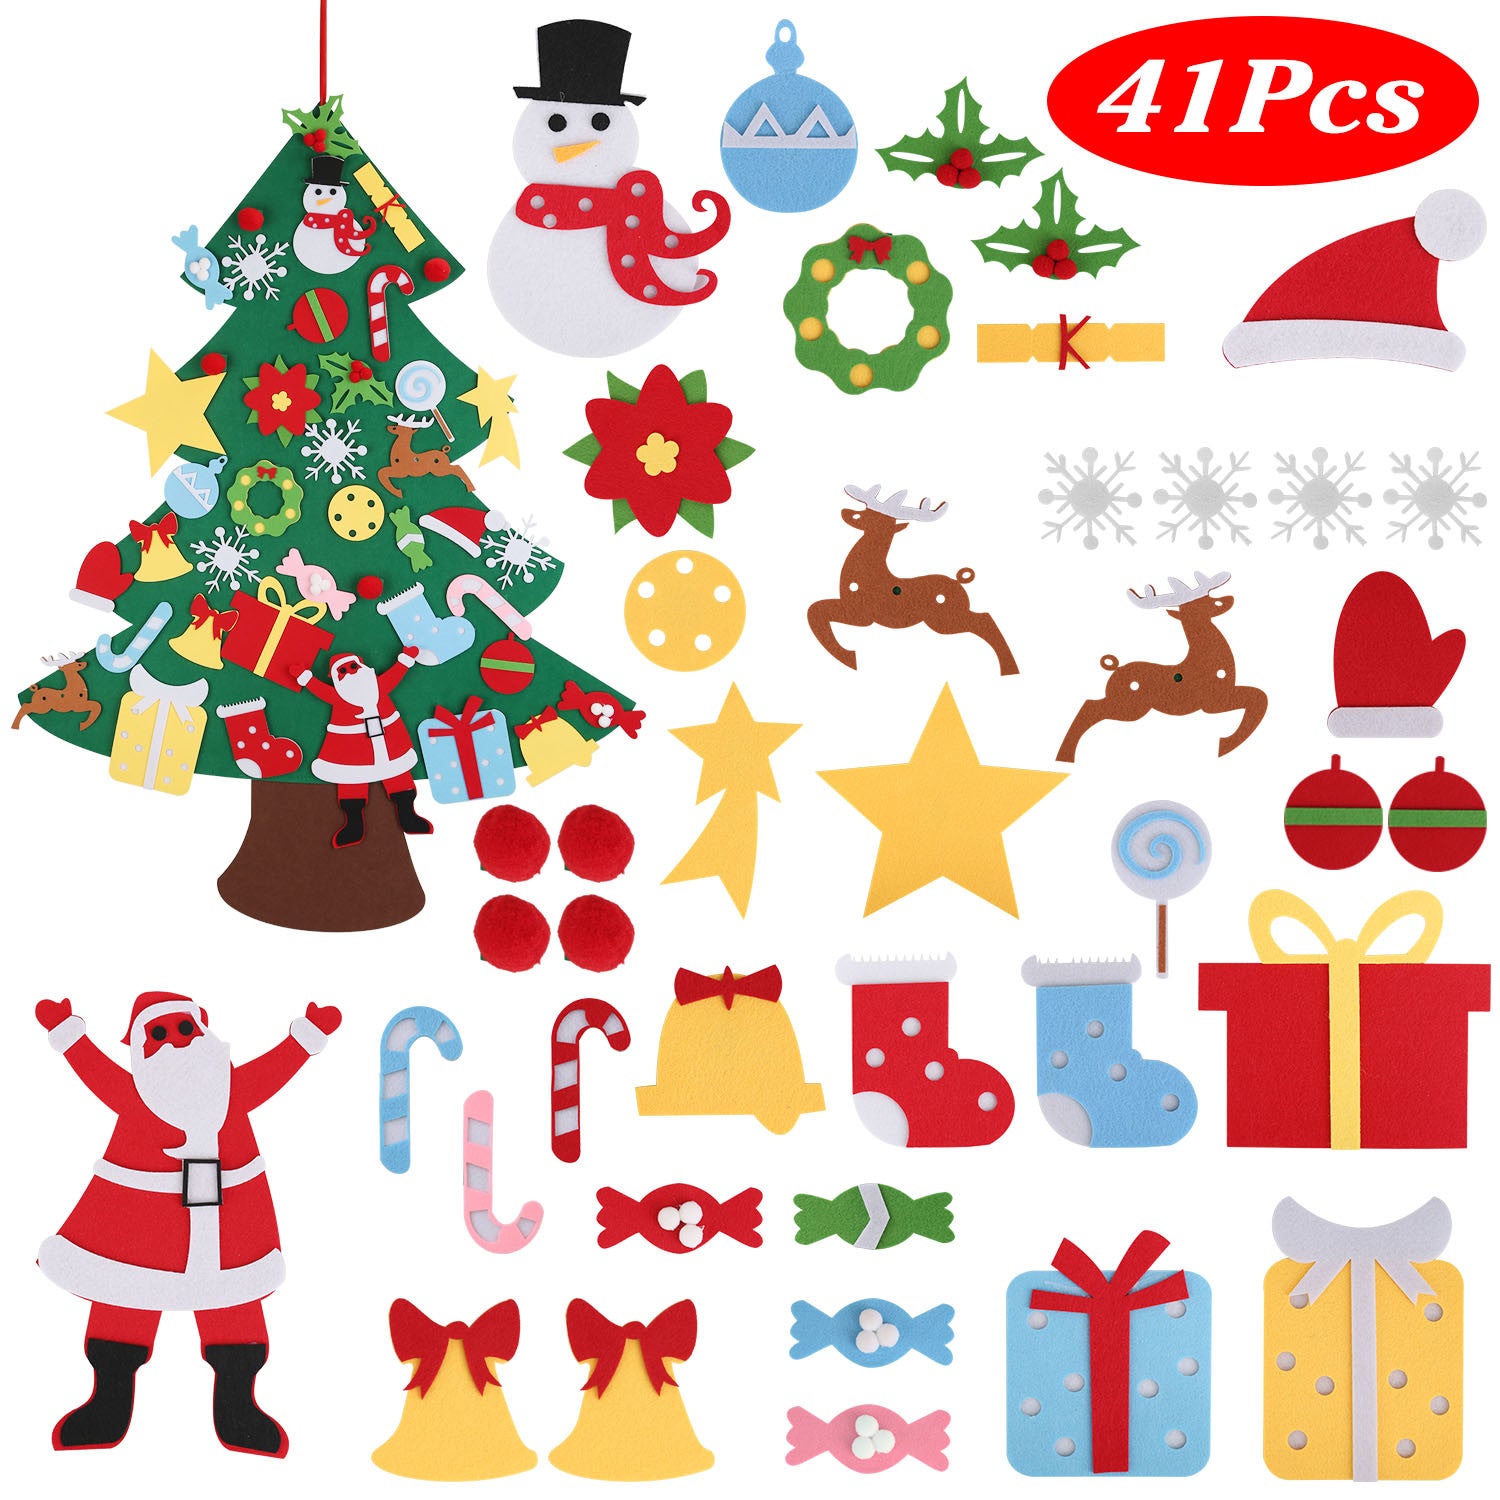 A set of visually appealing DIY Felt Christmas Trees 41Pcs Detachable Ornaments for Kids Toddler Wall Hanging Christmas Decorations Xmas Gift that feature Santa, reindeer, and Santa Claus.